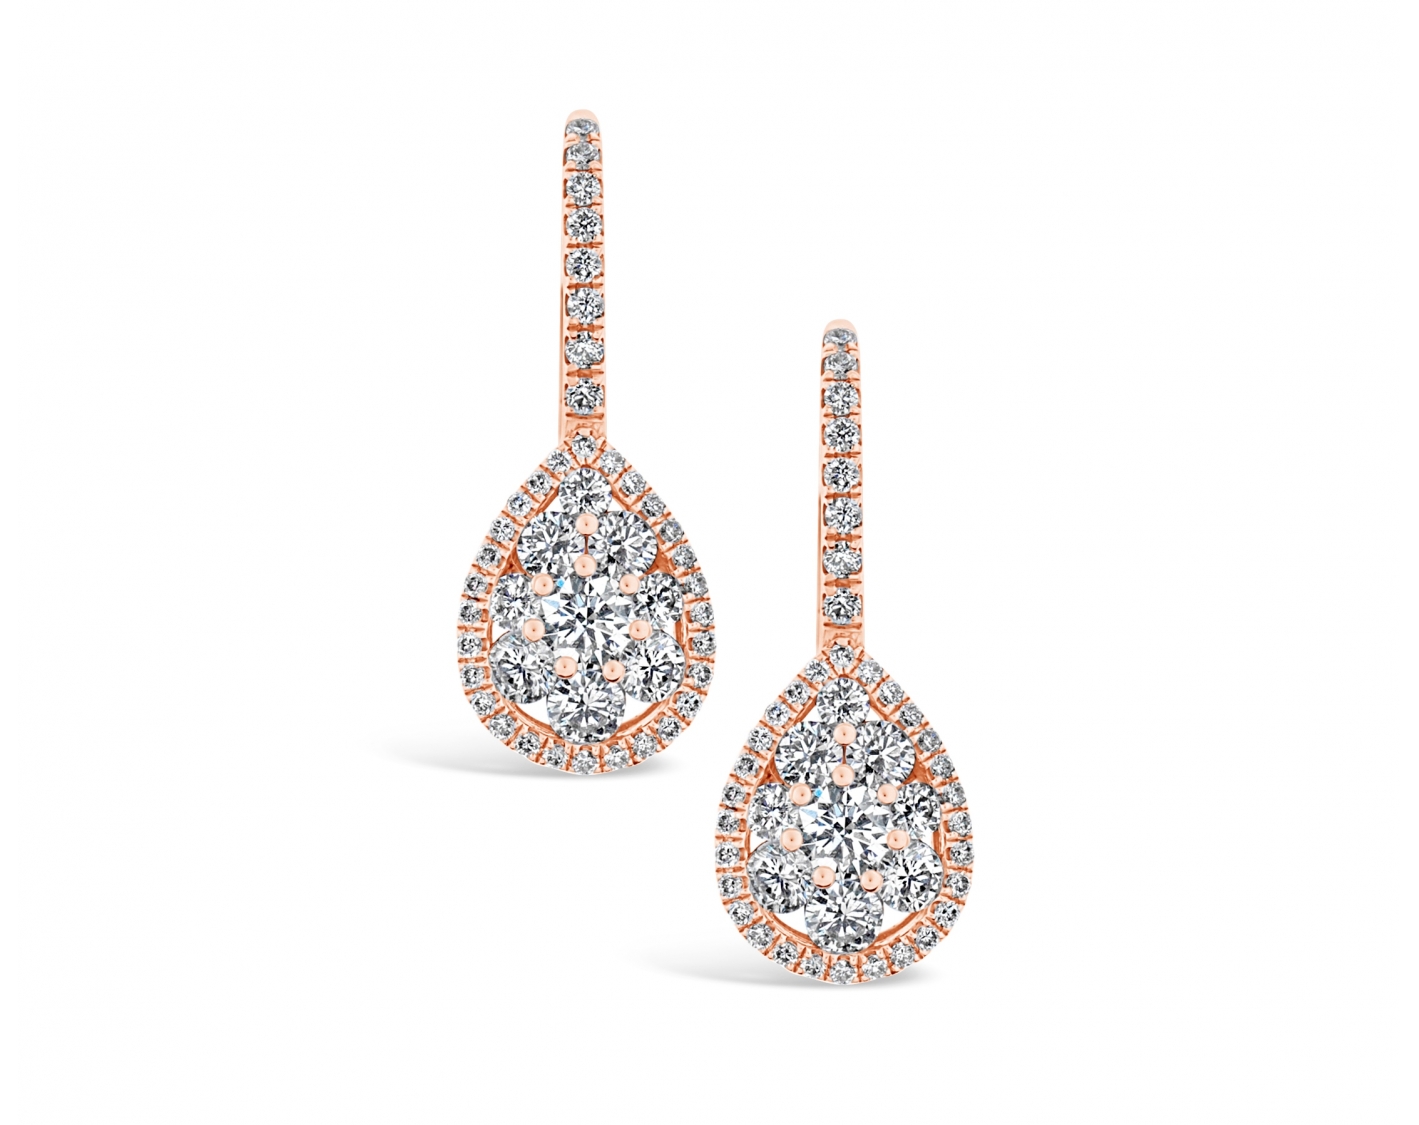 18k rose gold pear shaped illusion set diamond earrings with round upstones